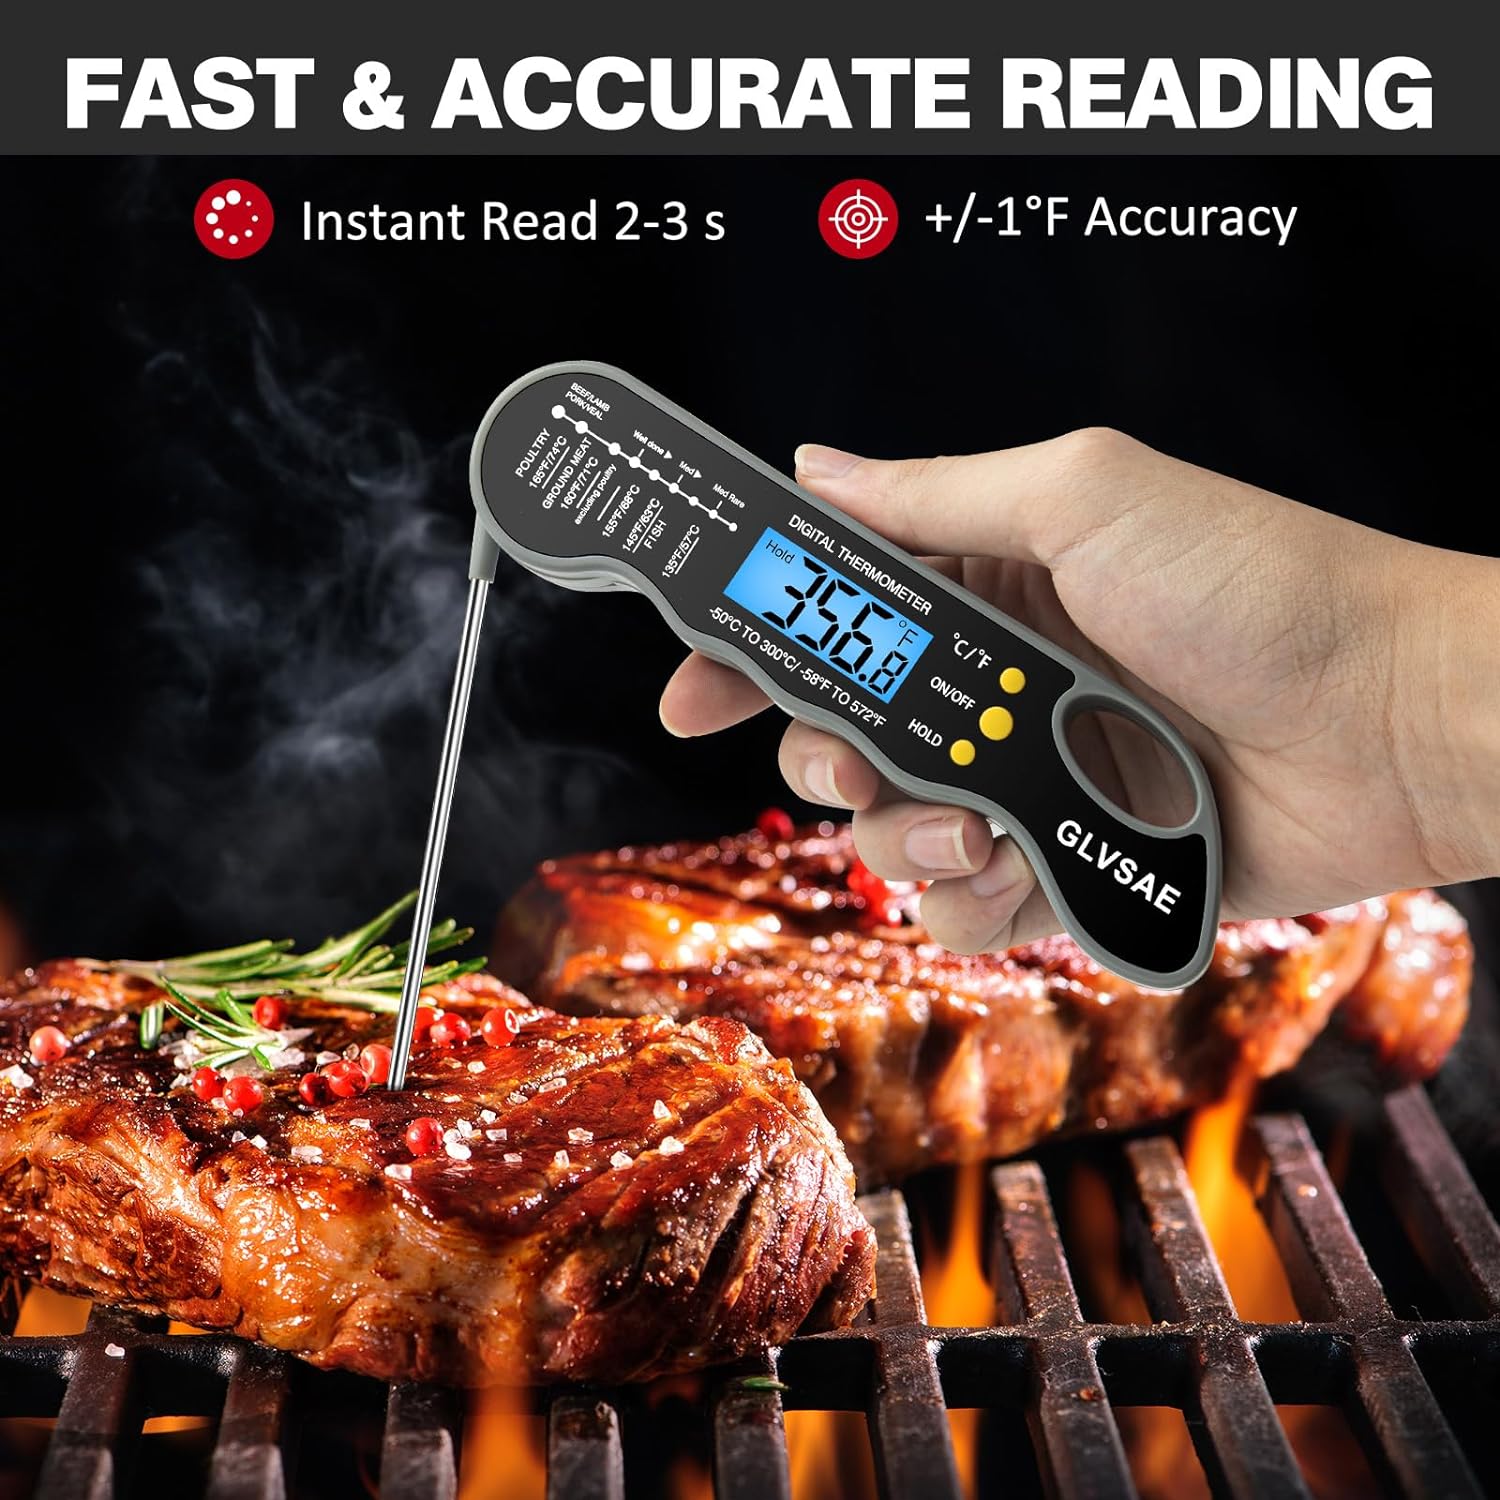 Waterproof Digital Instant Read Meat Thermometer with 4.6” Folding Probe Backlight  Calibration Function for Cooking Food Candy, BBQ Grill, Liquids,Beef by GLVSAE